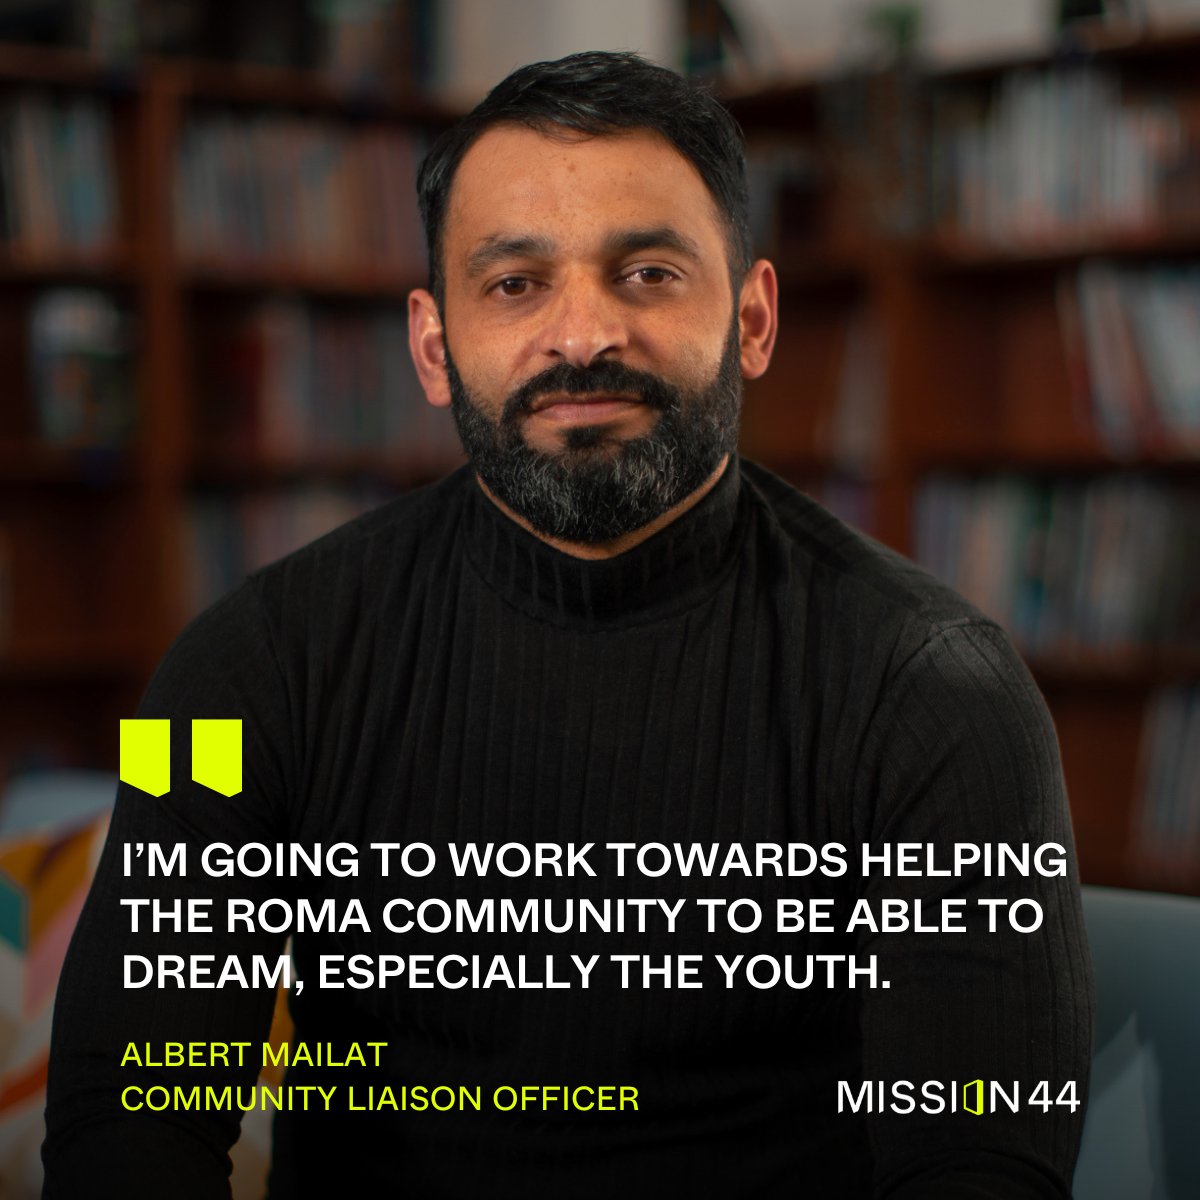 We’re working with @CoopAcademies to support students from Gypsy Roma backgrounds and reduce school exclusions. To celebrate #InternationalRomaDay, we spoke to Albert, one of the Community Liaison Officers in Leeds, about this work. Stay updated: mailchi.mp/mission44/marc…